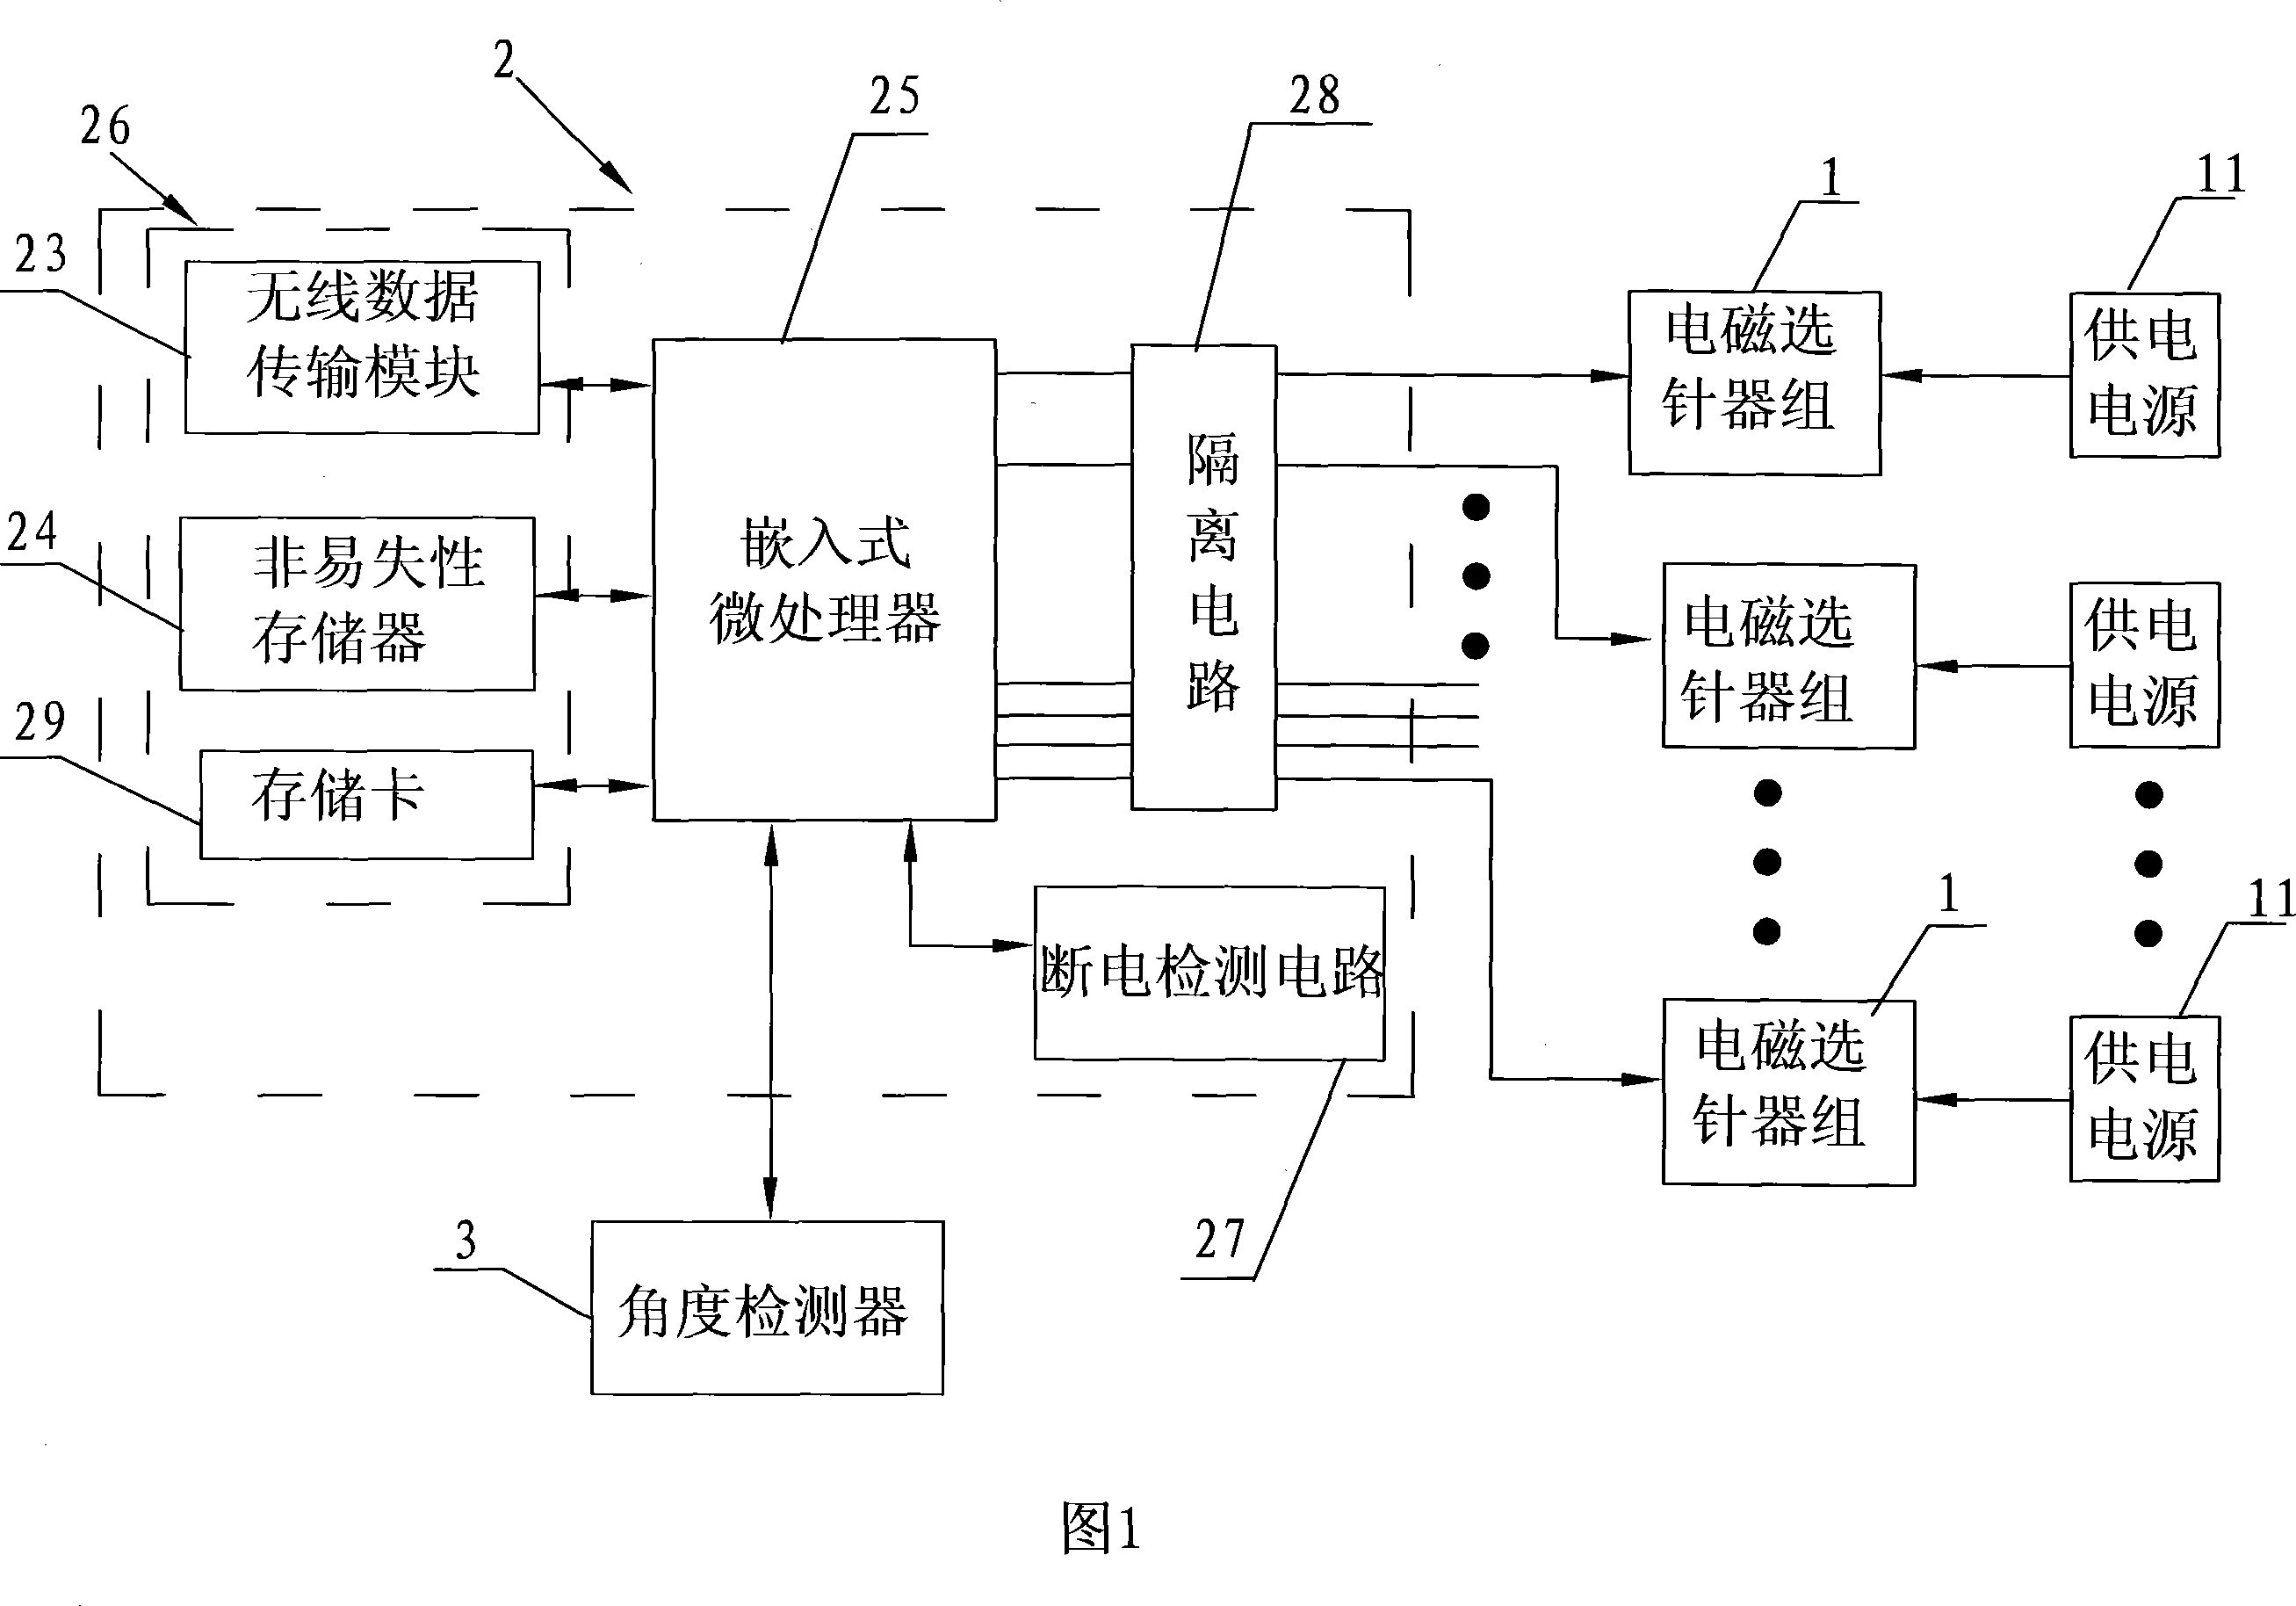 Control system for electronic jacquard machine